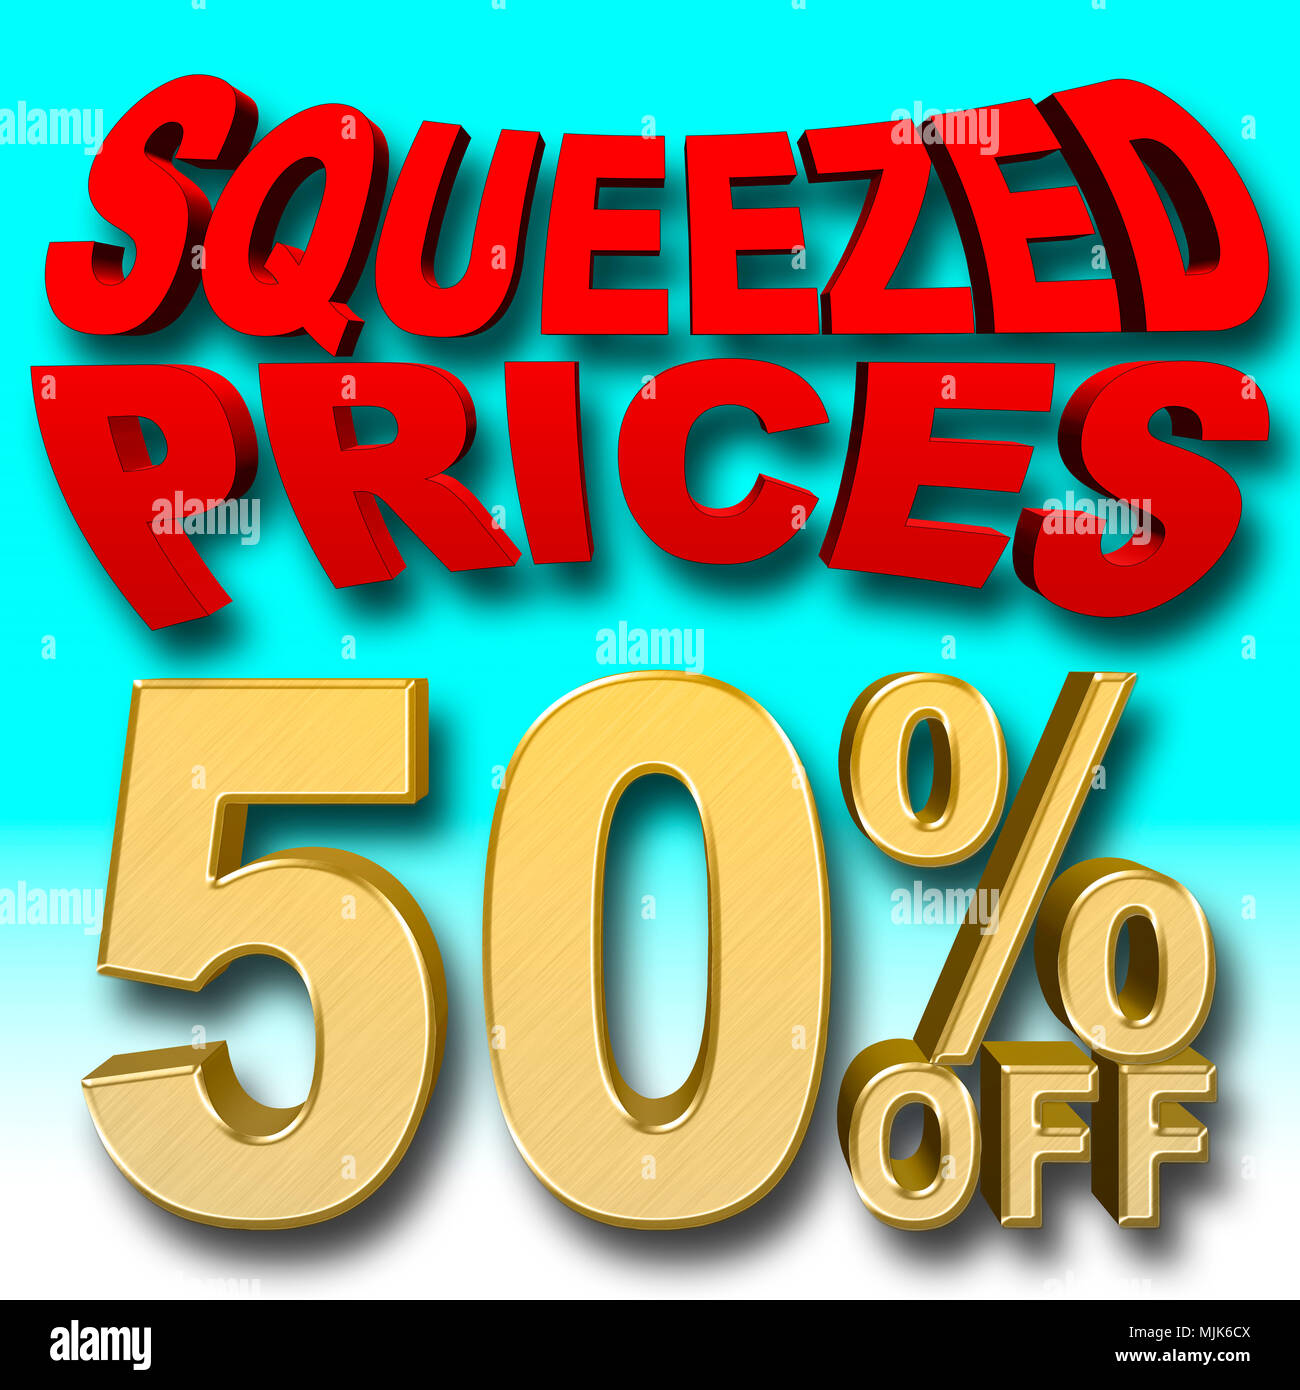 Stock Illustration - Golden Text: 50 Percentage Off, Red Text: Squeezed Prices, 3D Illustration, Blue Gradient Background, Different. Stock Photo